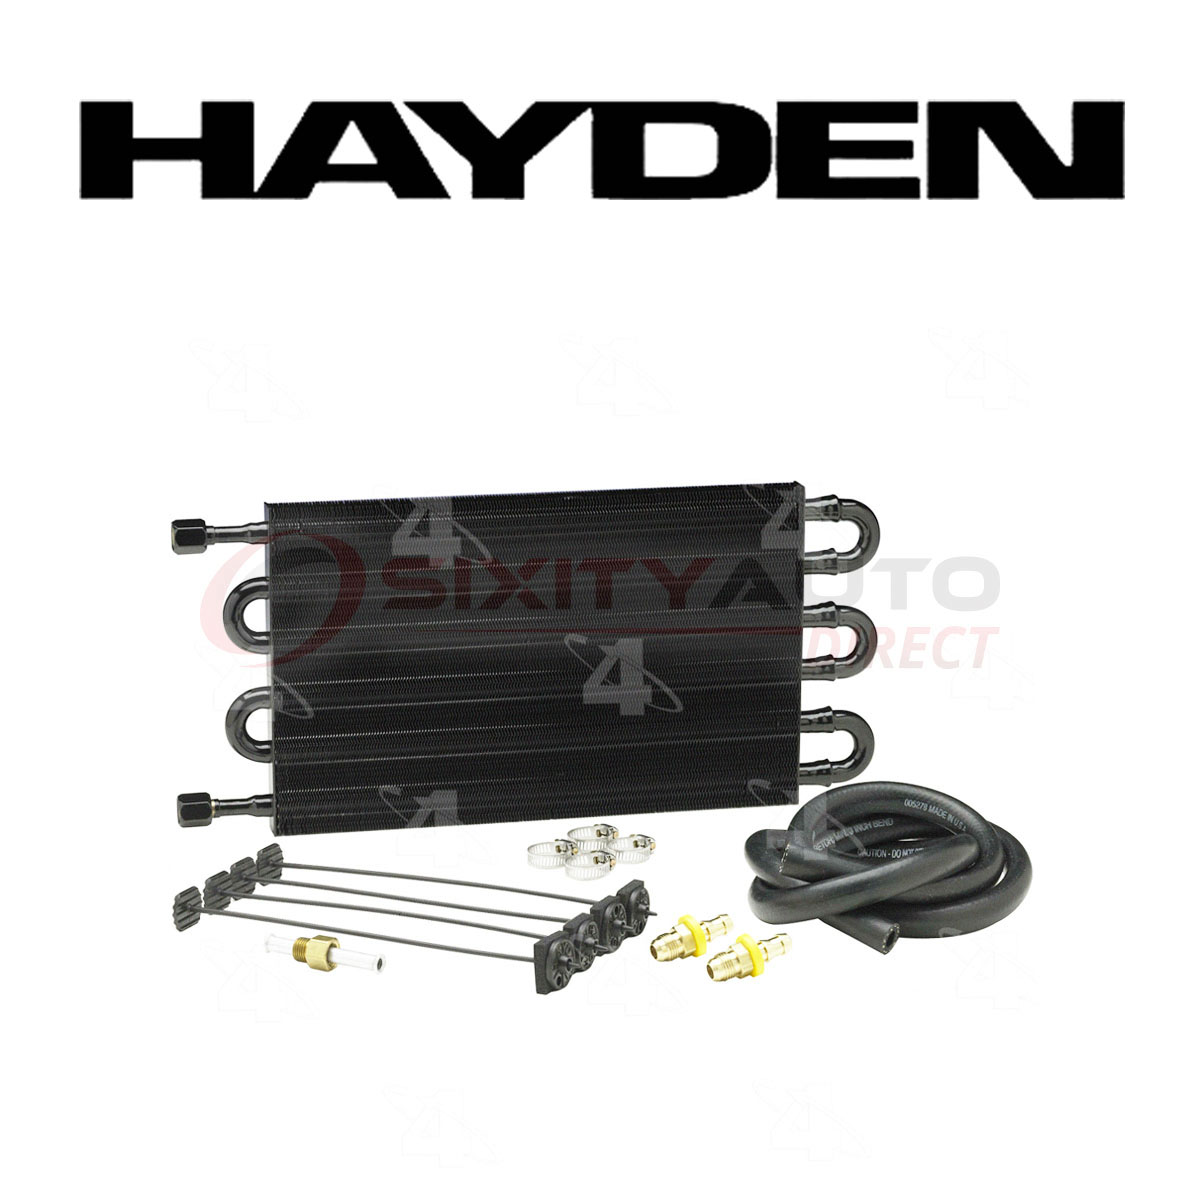 Hayden Transmission Oil Cooler for 2002-2014 Chrysler Town & Country 3.3L pv | eBay 2014 Chrysler Town And Country Engine Oil Cooler